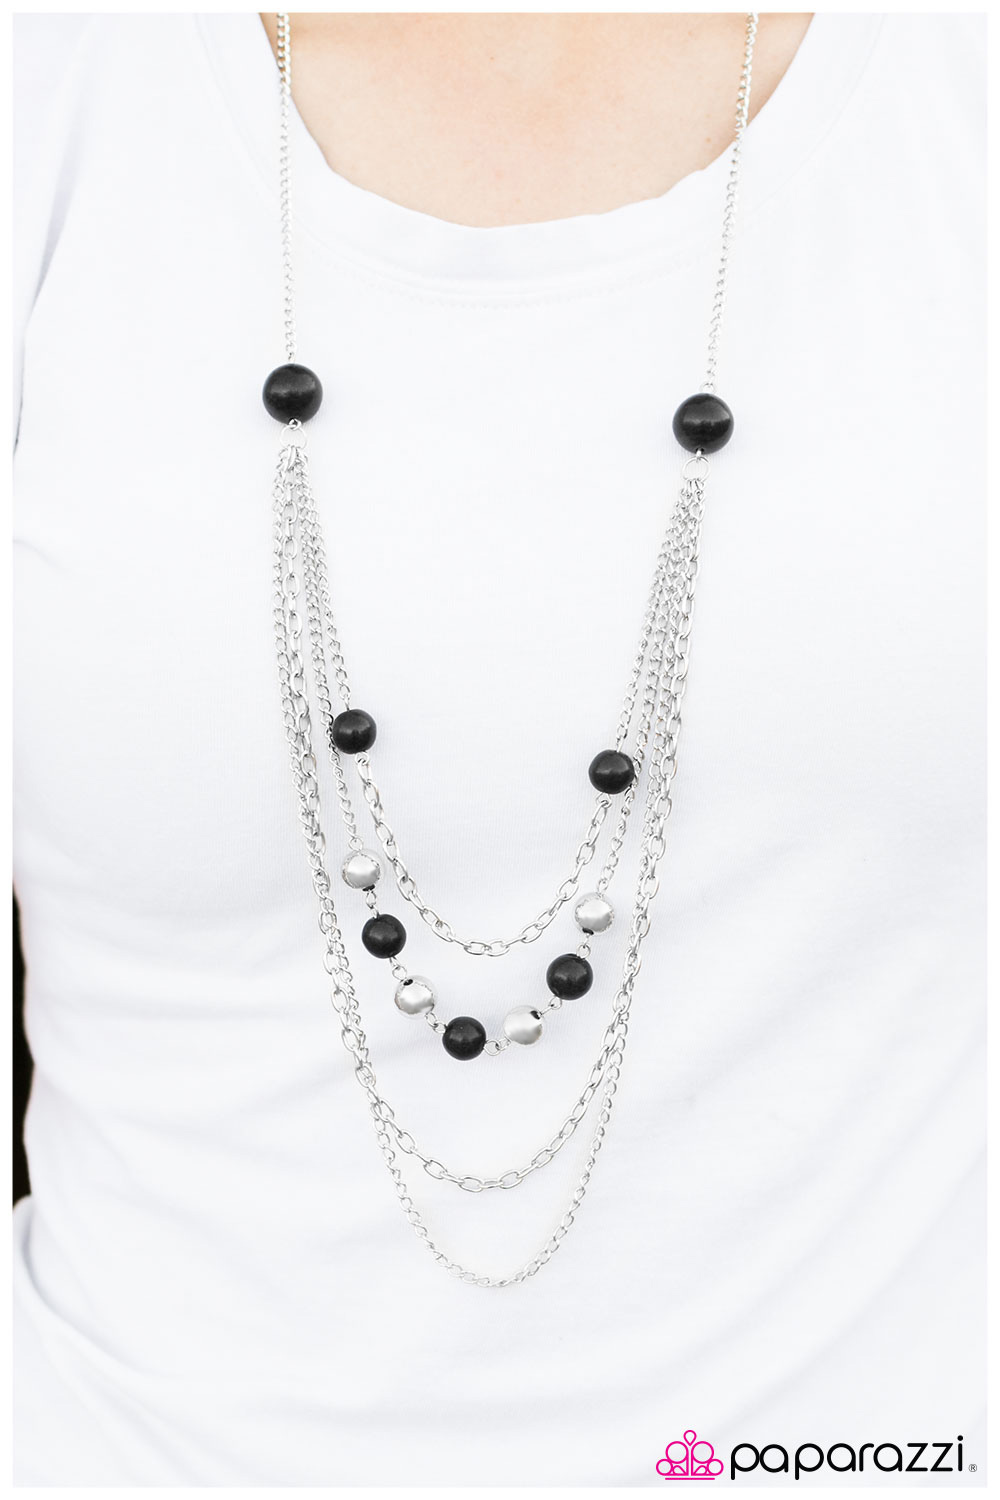 Roman Holiday - Black - Paparazzi $5 Jewelry Join or Shop Online